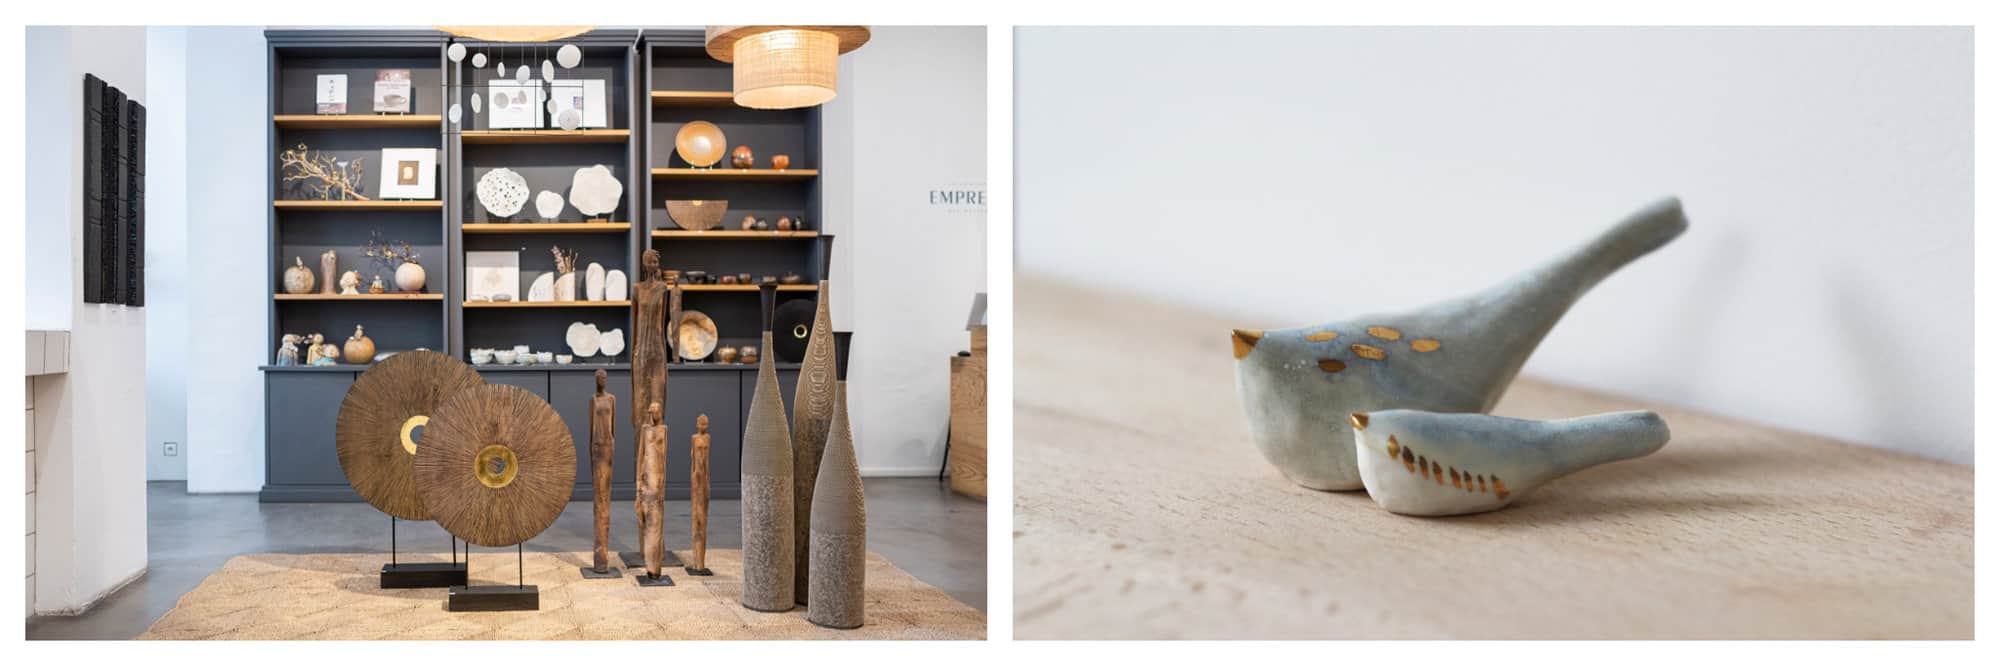 Left: an interior shot of Empreintes concept store in Paris. Right: Two sculptures of a mother bird and its young. 